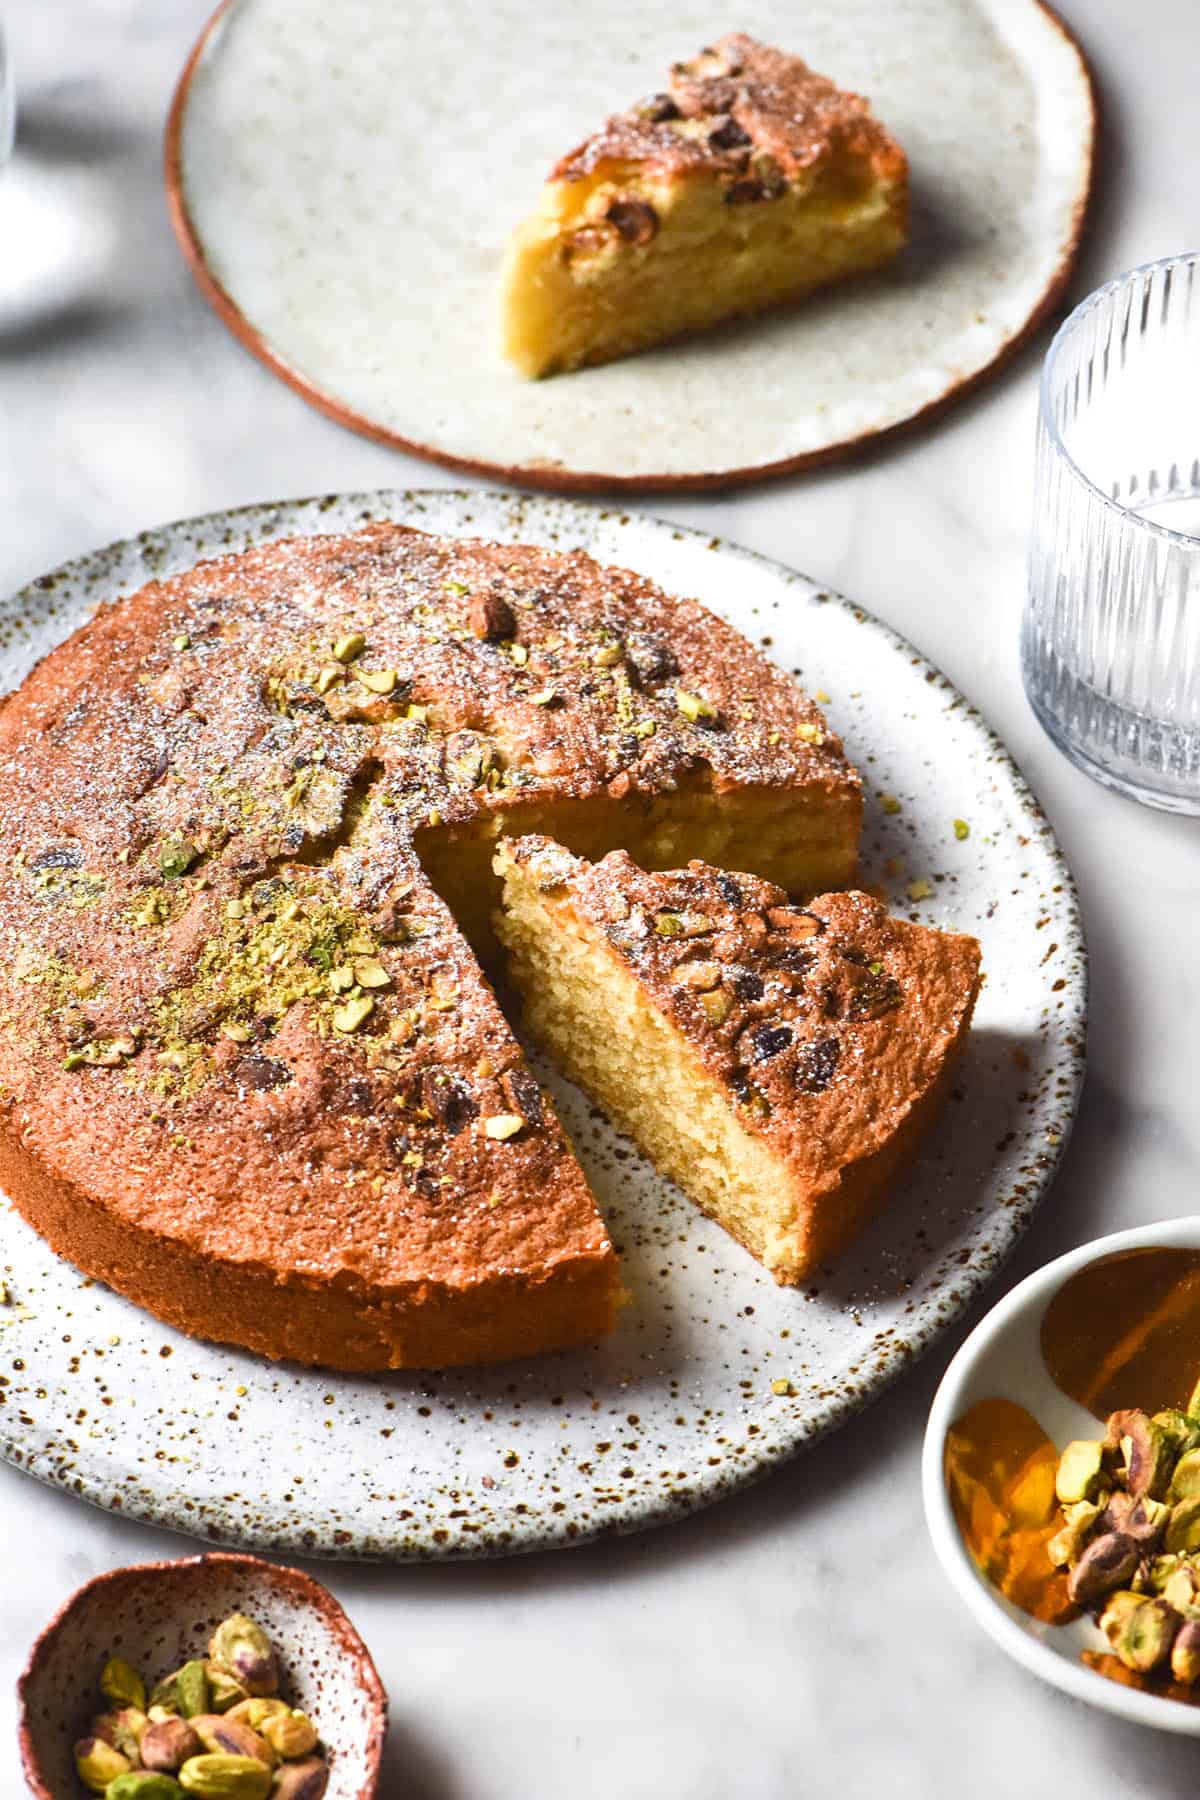 A side on brightly lit image of a gluten free olive oil cake chopped with pistachios and icing sugar. The cake sits atop a white marble table and is surrounded by water glasses, a slice of cake on a white ceramic plate and pinch bowls filled with pistachios